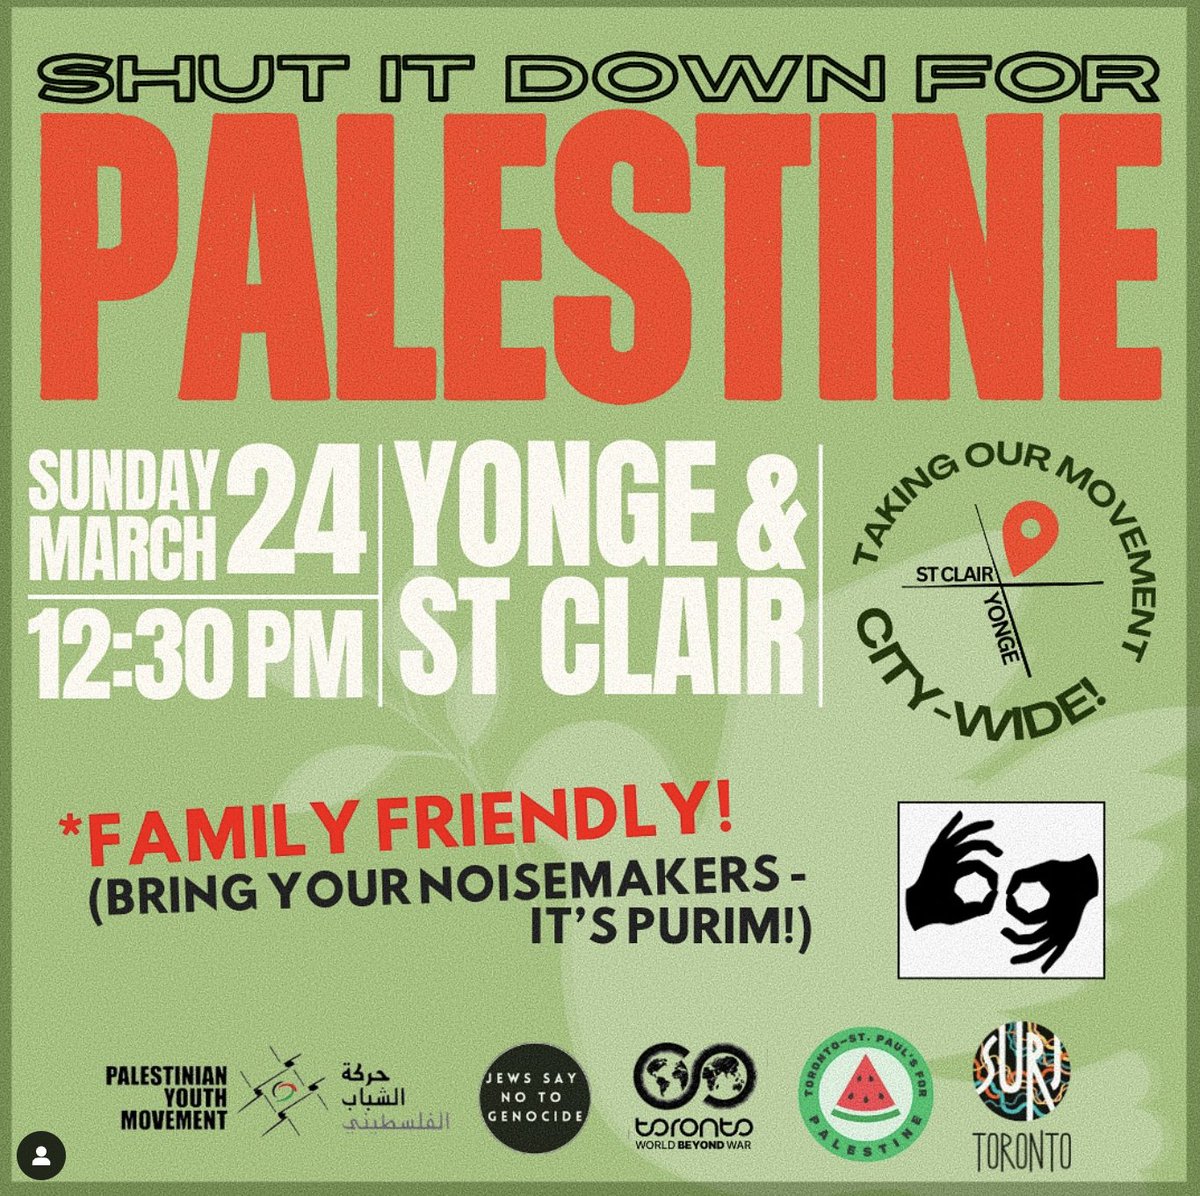 'Bring your noisemakers -- it's Purim!' Sooo, what does a Jewish holiday have to do with a march for Palestine?